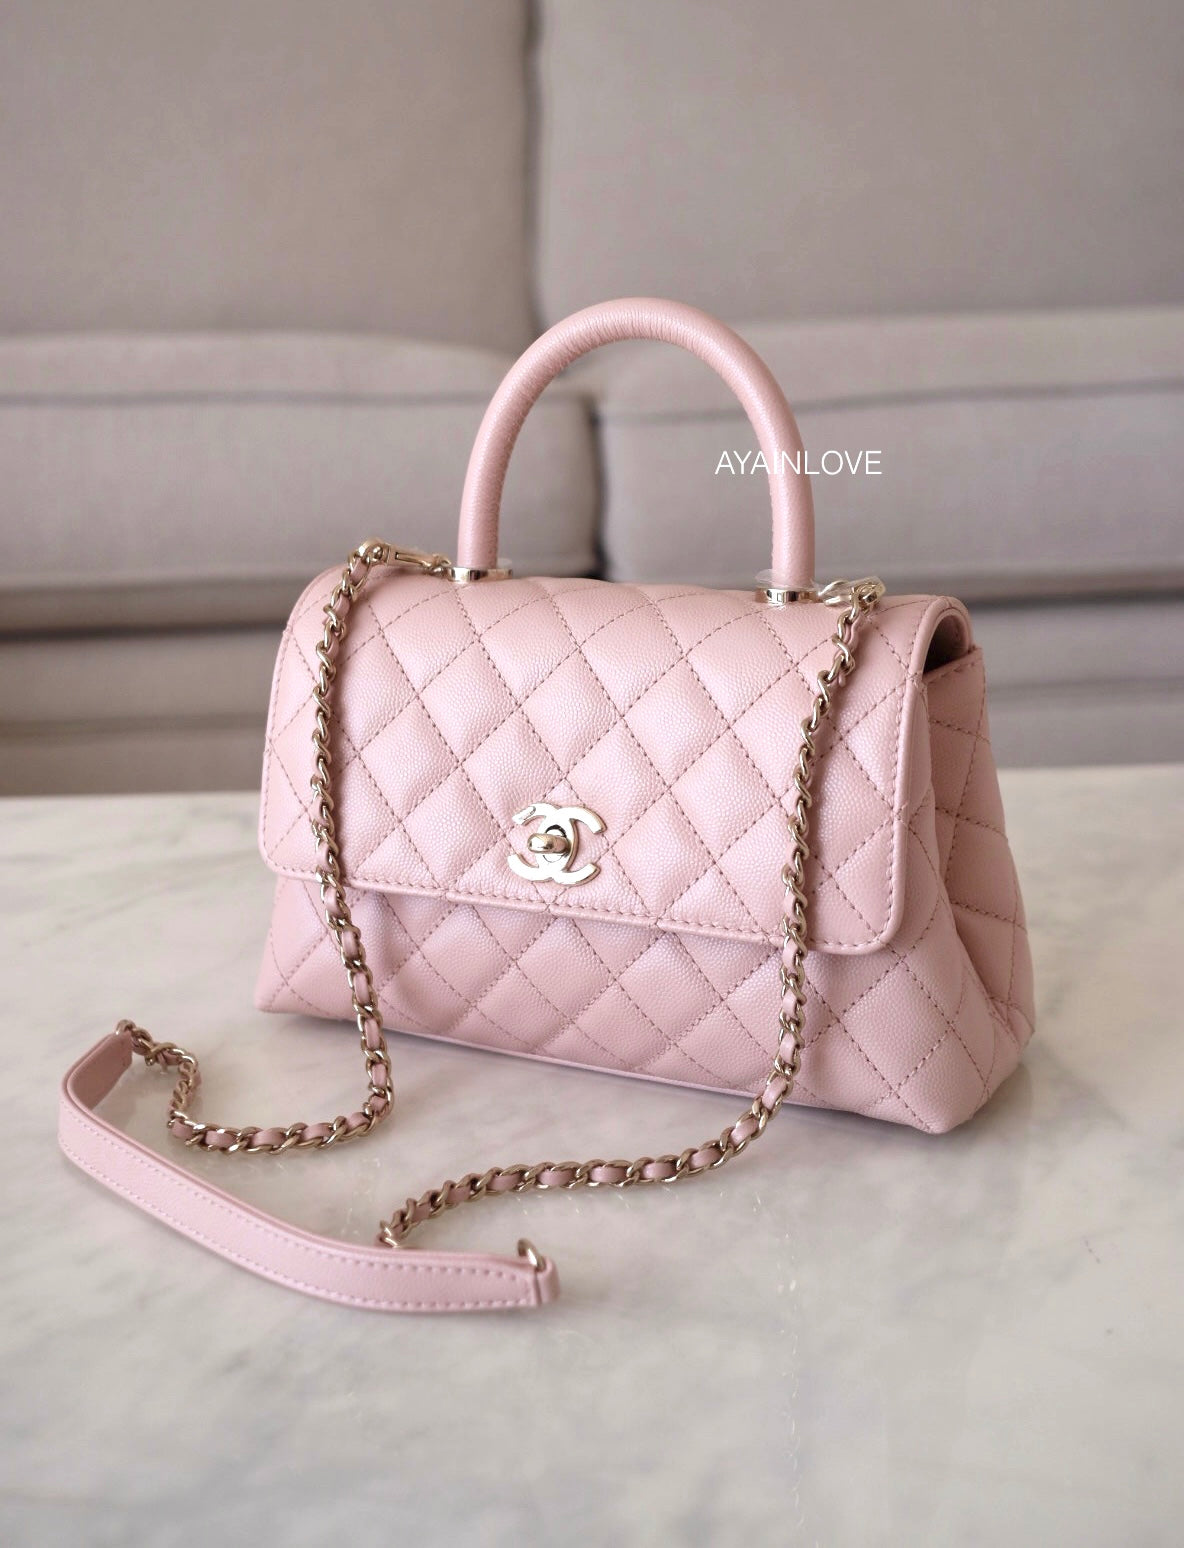 Real Luxe - Chanel Coco Handle Small Size. This bag is very hard